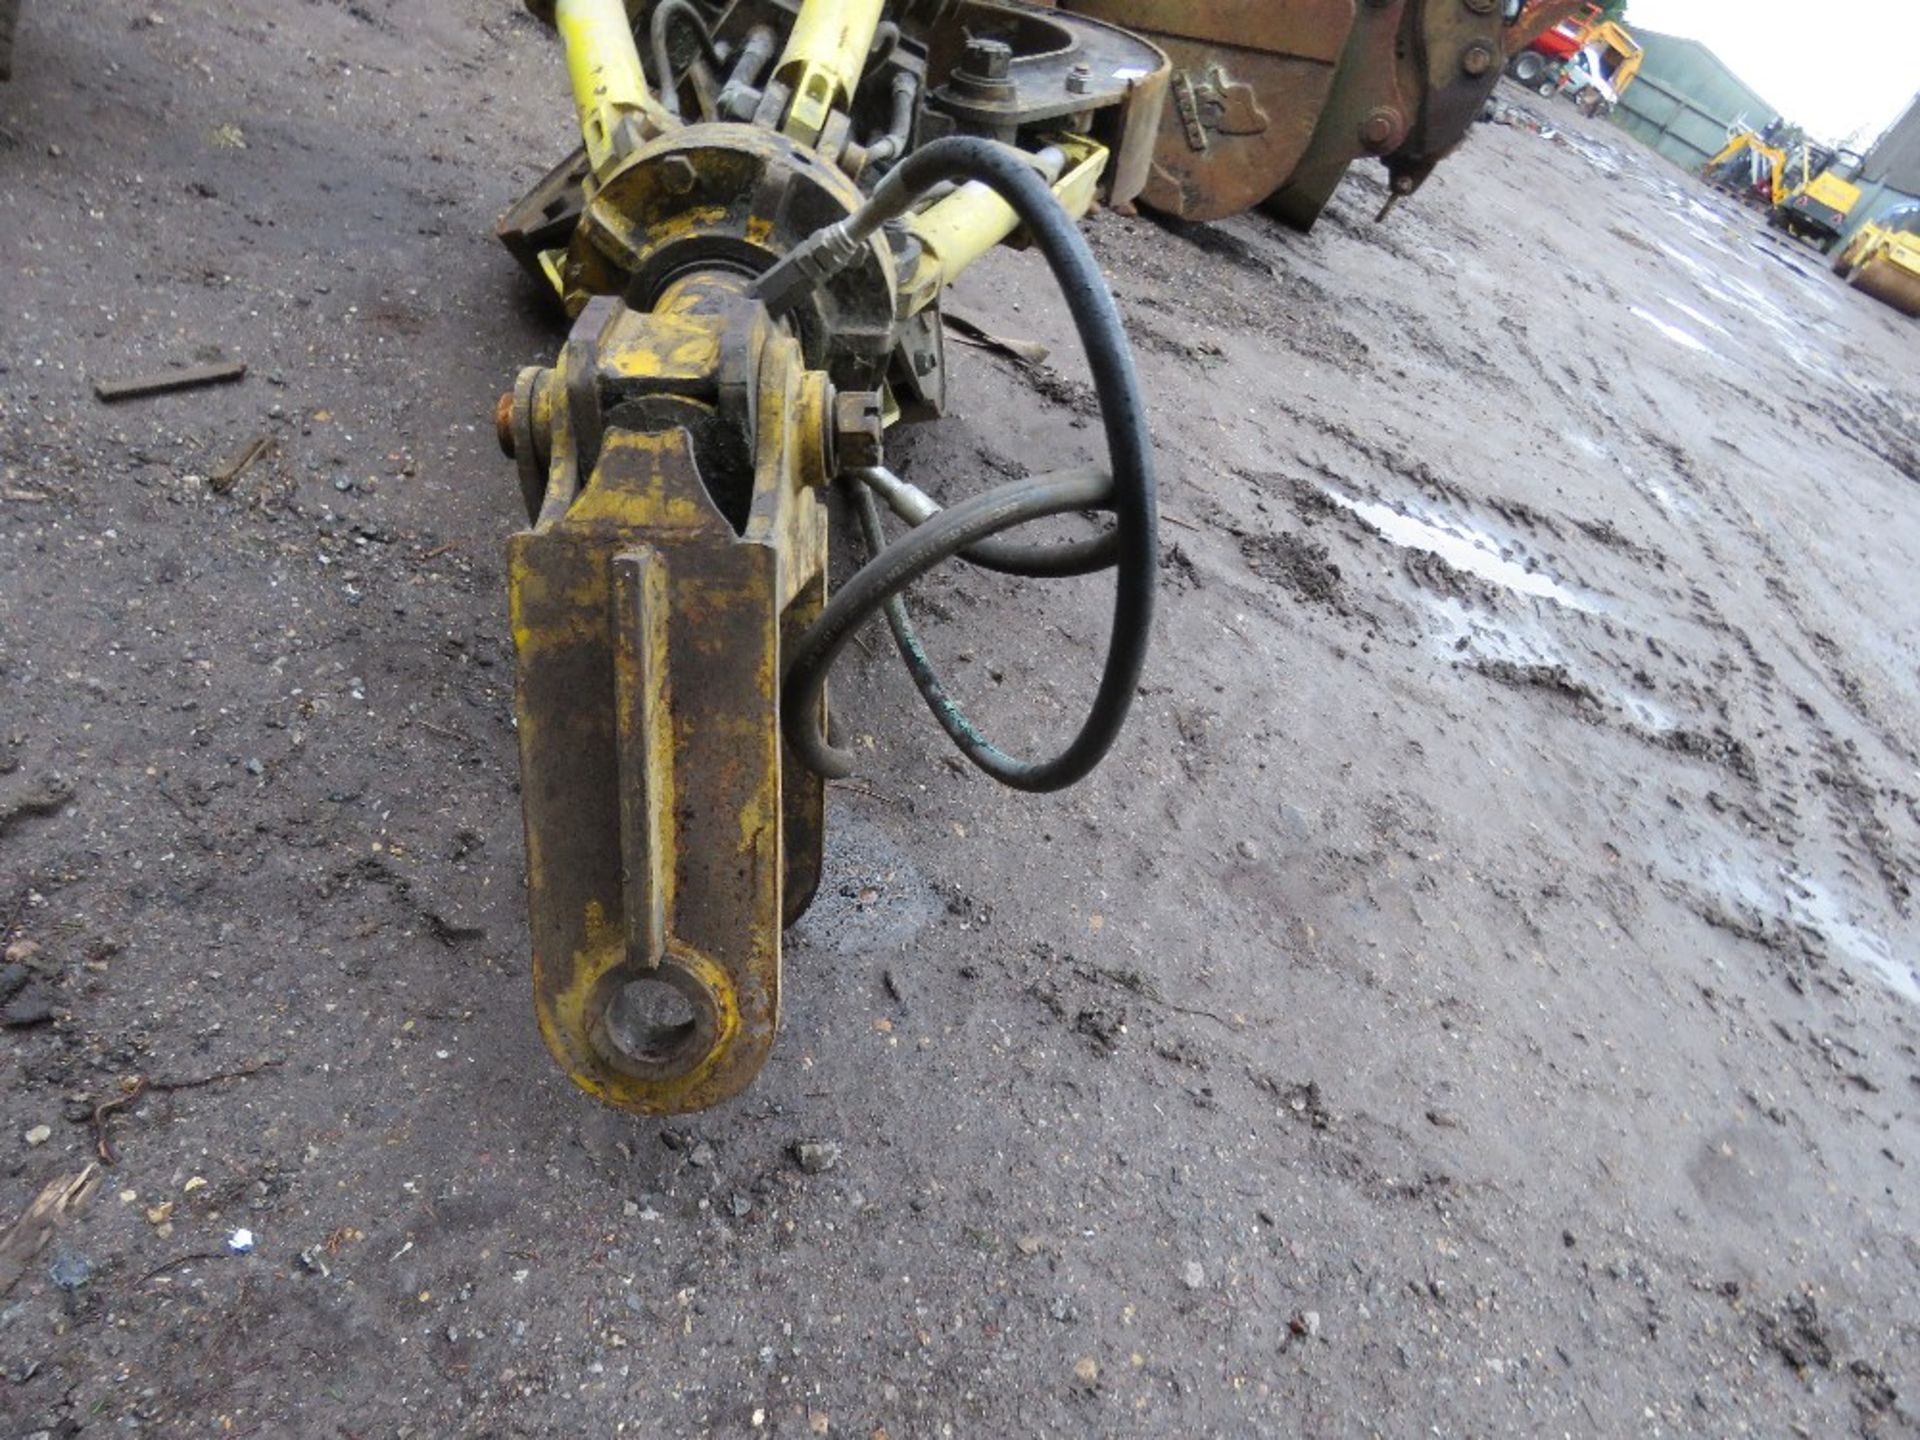 EXCAVATOR MOUNTED 5 TINE SCRAP GRAB WITH ROTATOR ON 65MM PINS, RAMS DONE LITTLE WORK SINCE REFURBISH - Image 2 of 6